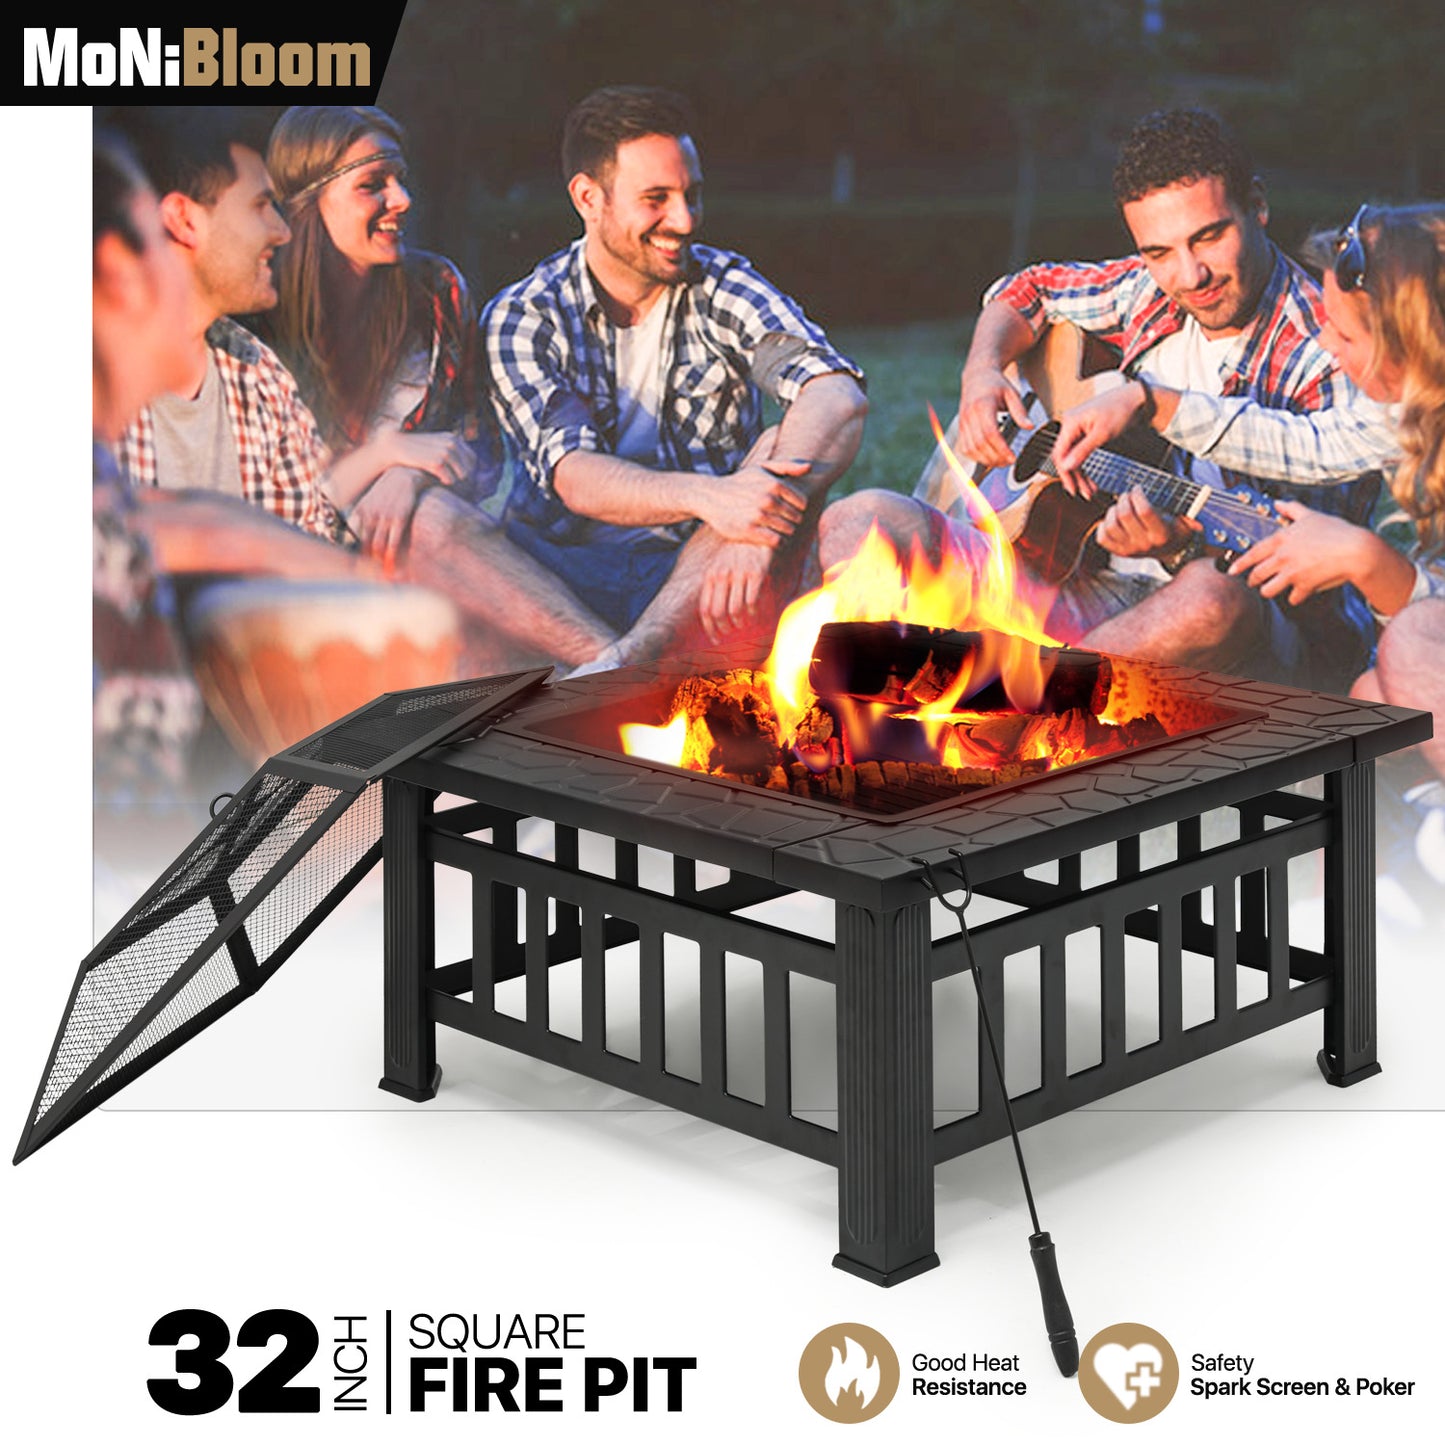 32" Square Fire Pit Table w/Log Grate+Poker & Spark Screen